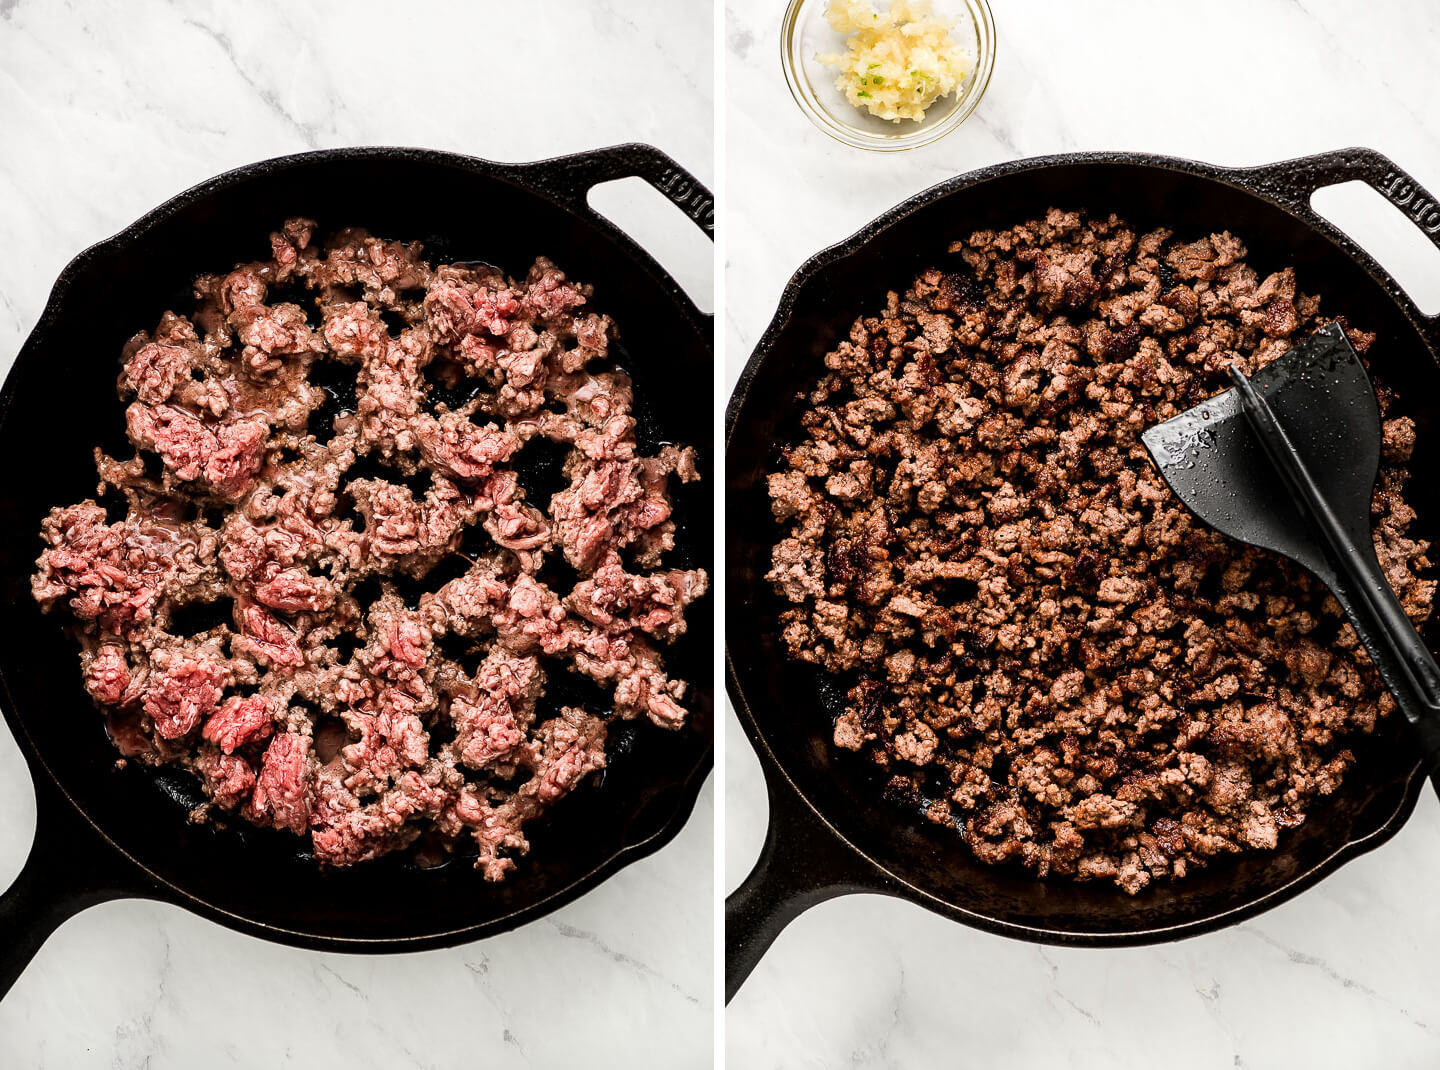 Diptych- Skillet of crumbled raw ground beef in a skillet; browned beef with garlic to the side.